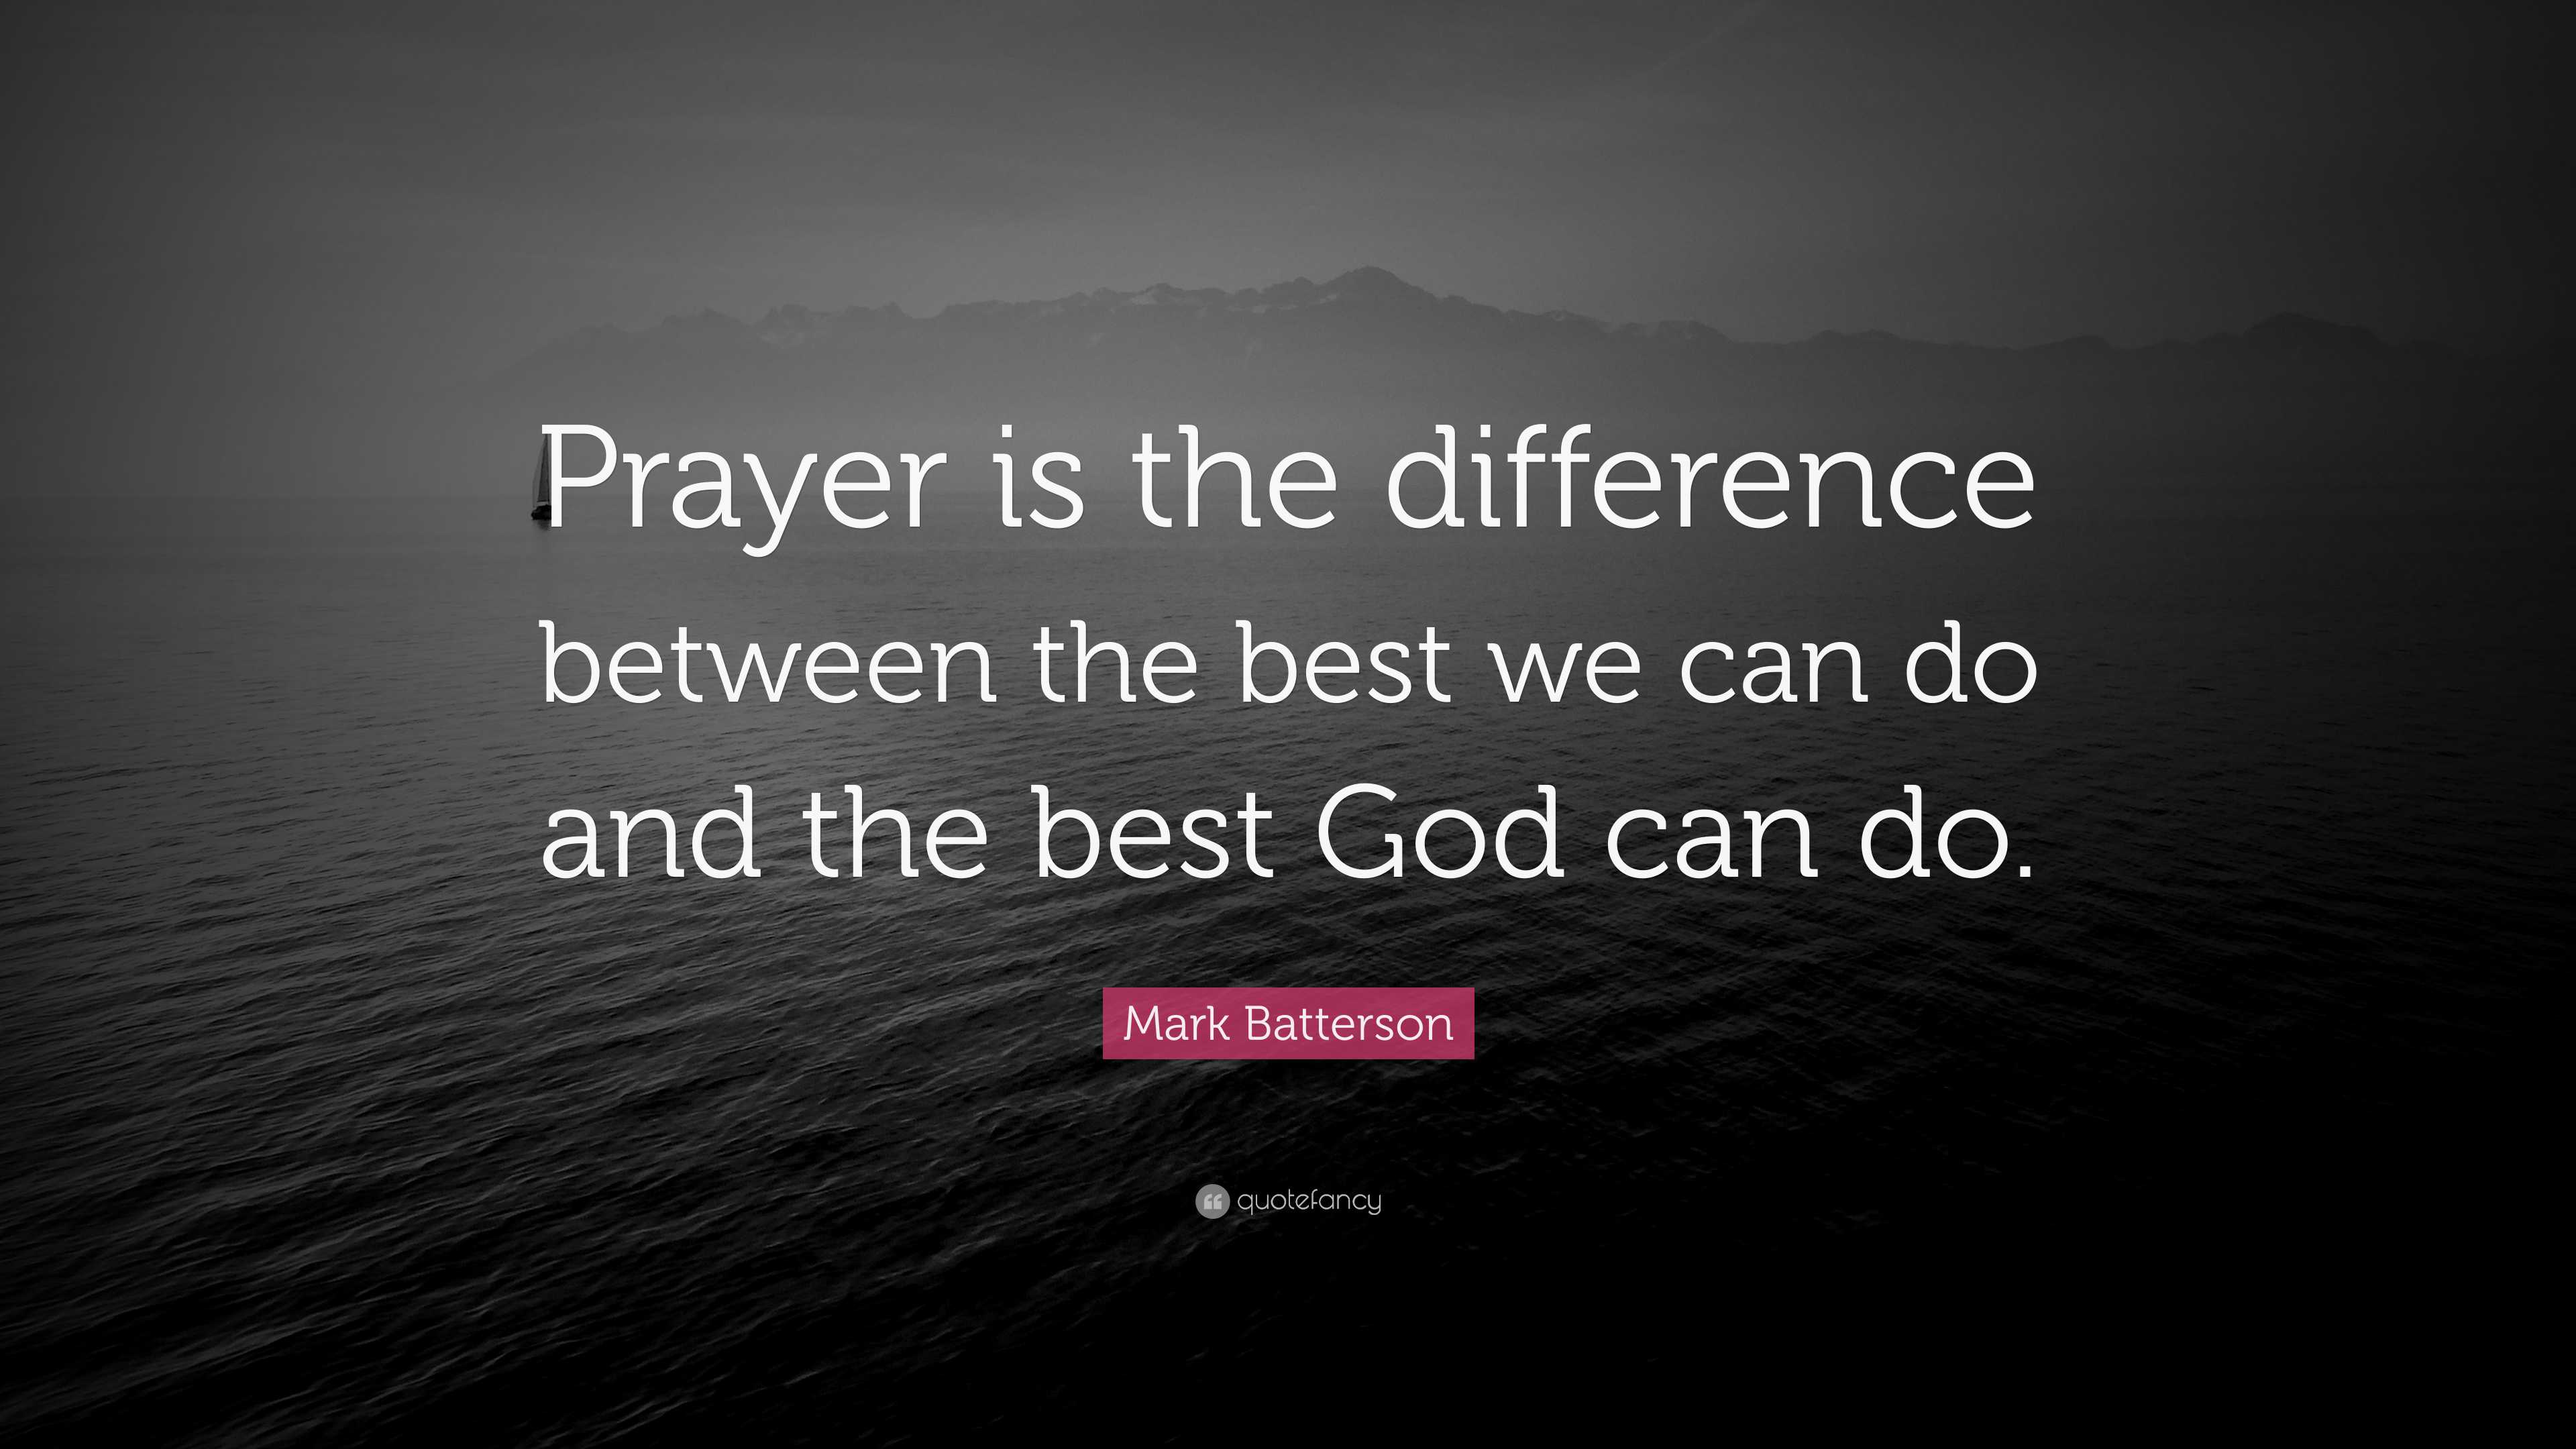 Mark Batterson on X: PRAYER is the difference between the best WE CAN DO  and the best GOD CAN DO. eleven years ago today, #TheCircleMaker released  and it's still true: the greatest tragedy in life are the prayers that go  UNANSWERED because they